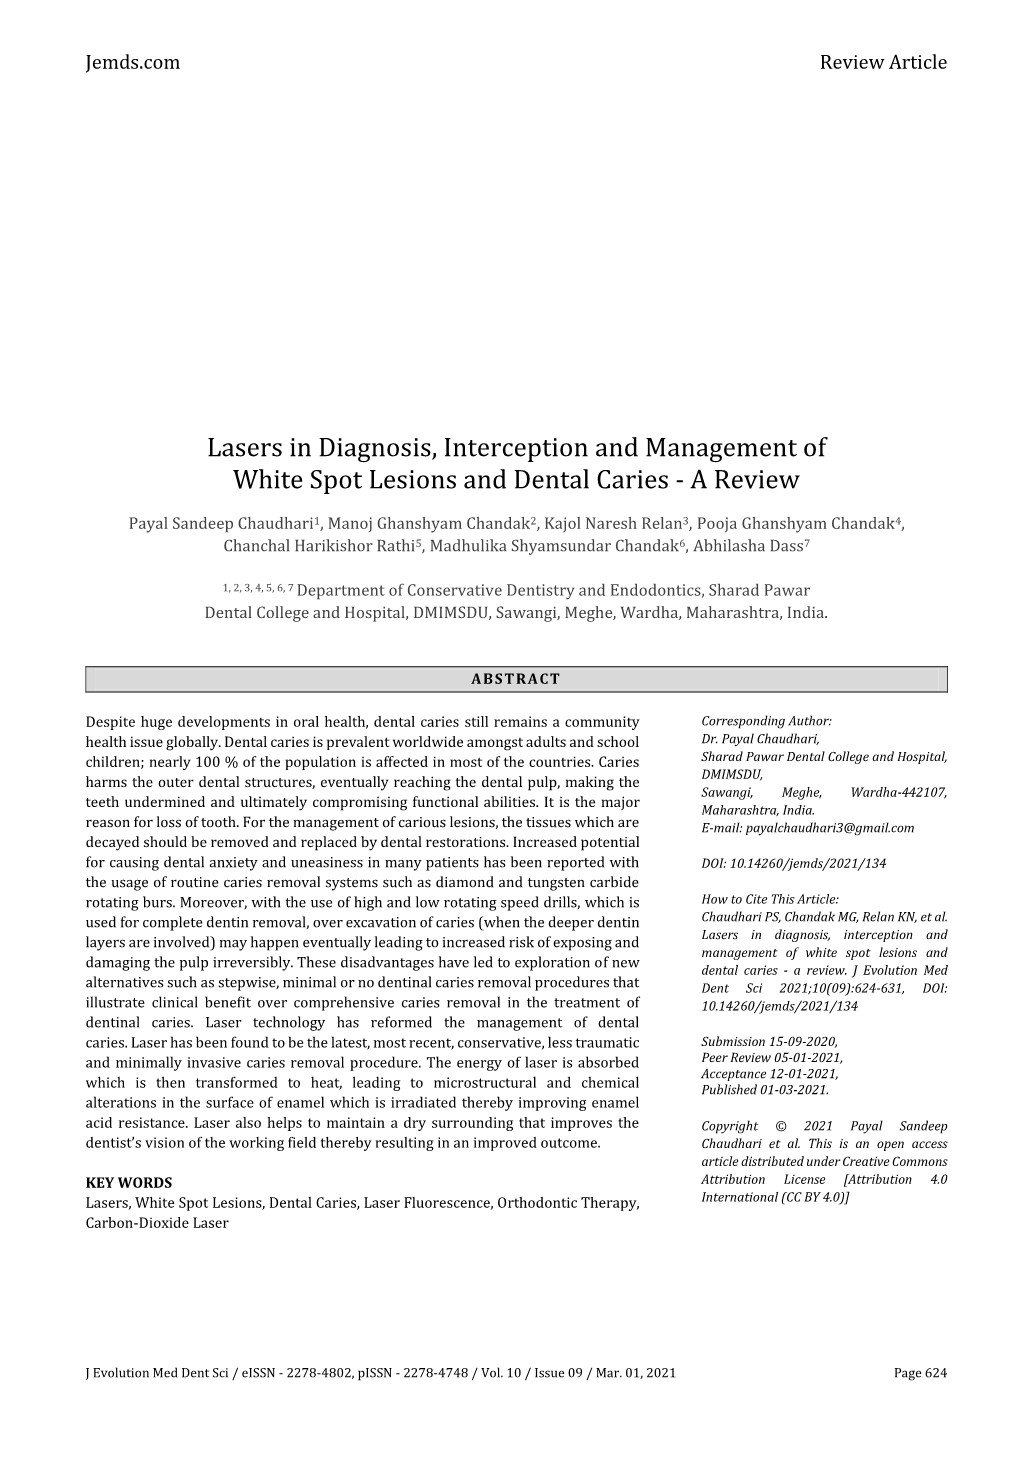 Lasers in Diagnosis, Interception and Management of White Spot Lesions and Dental Caries - a Review